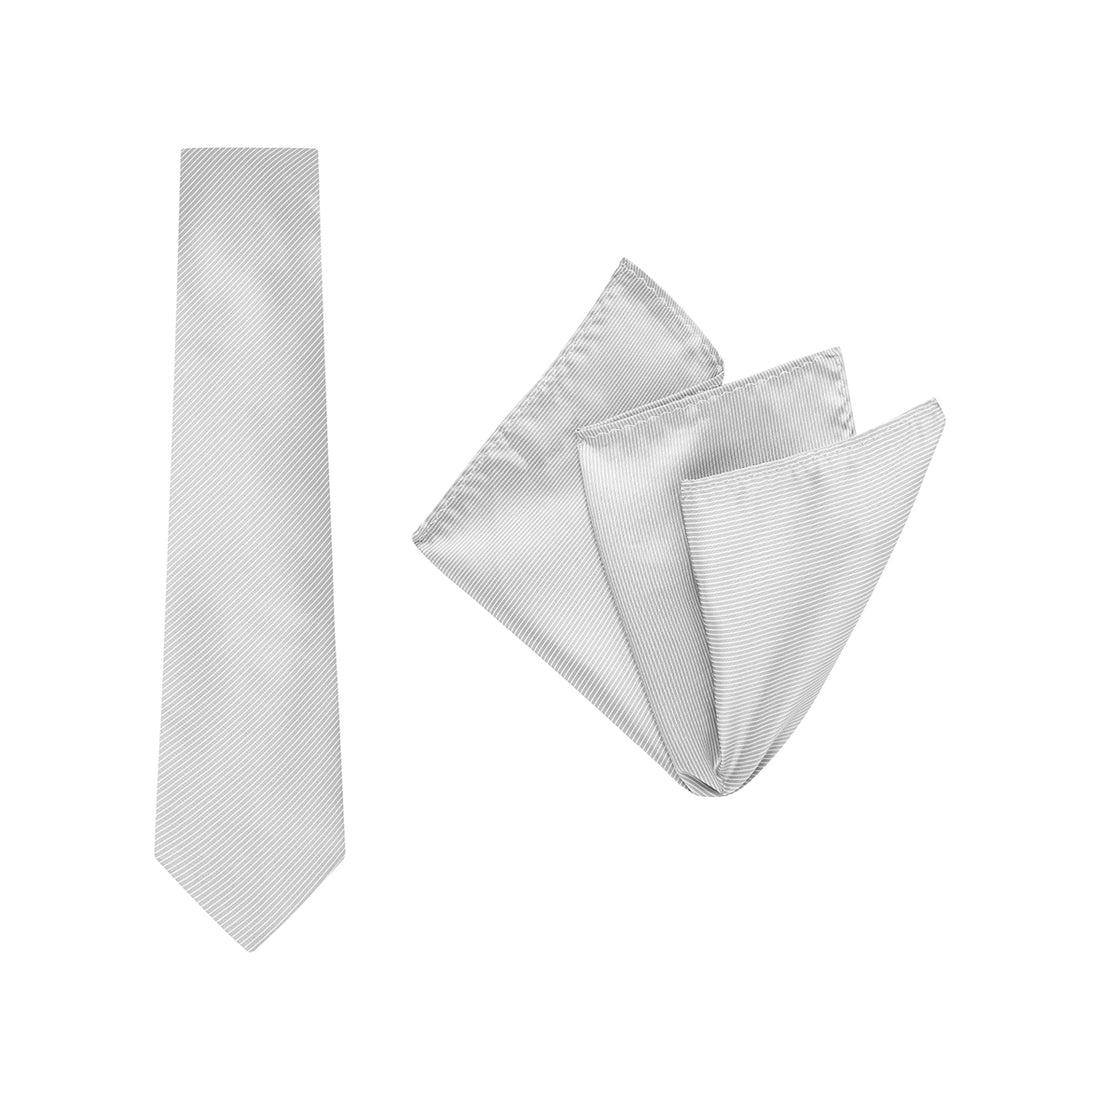 TIE + POCKET SQUARE SET. Pinstripe. Grey. Supplied with matching pocket square.-Ties-PEROZ Accessories